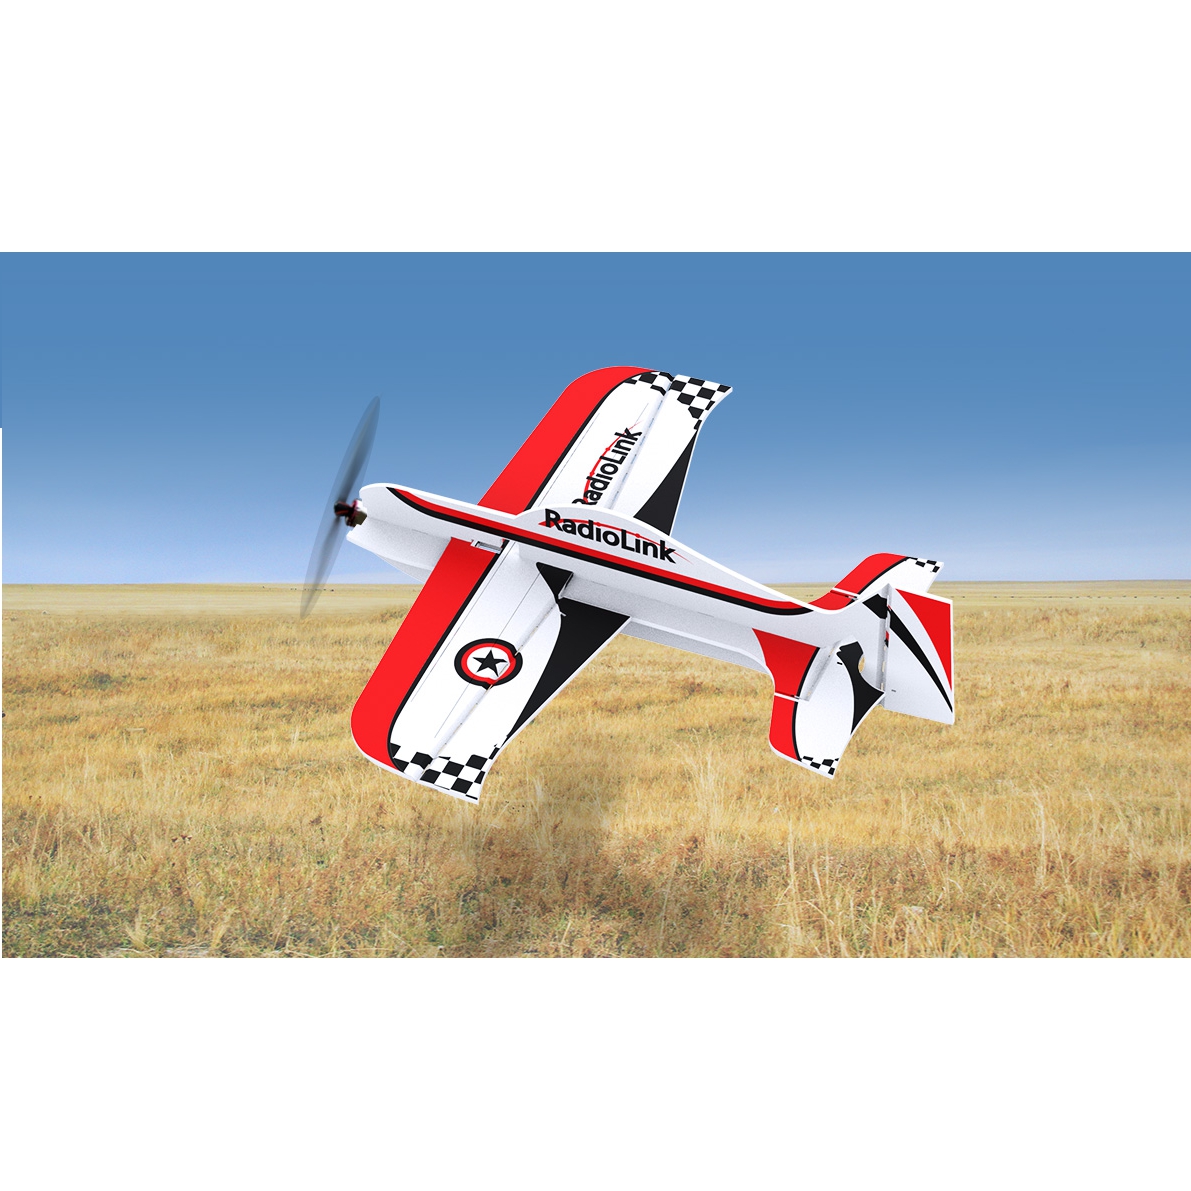 

Radiolink A560 560mm Wingspan 3D Poly Fixed Wing RC Aircraft Drone Airplane PNP For Beginner Trainer